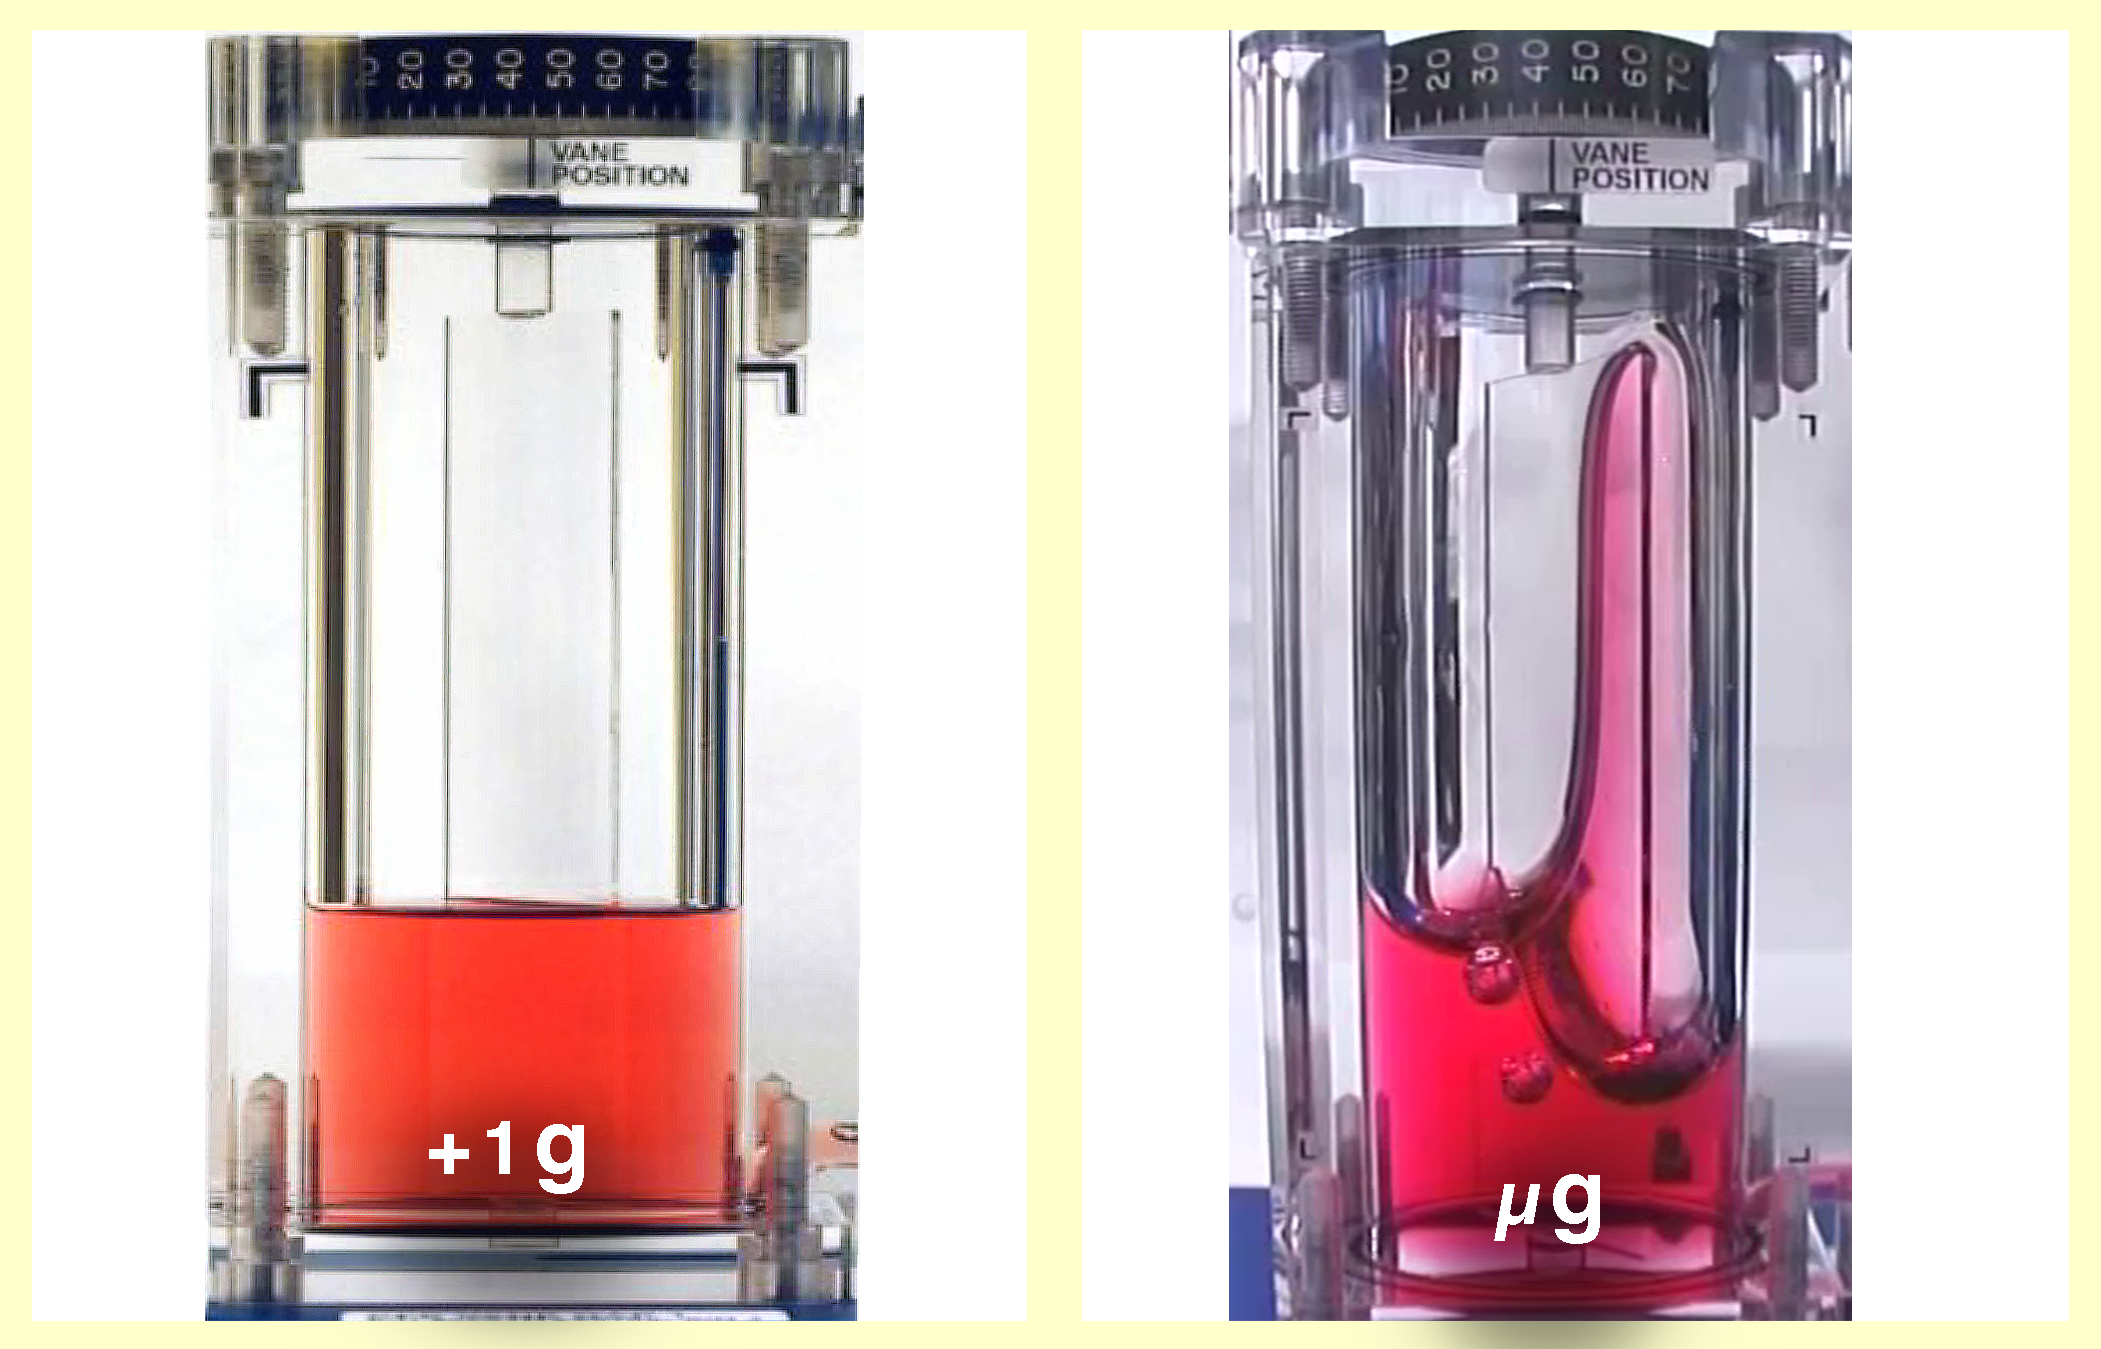 Two images showing how fluid in "vanes" work in microgravity with red and pink tubes.